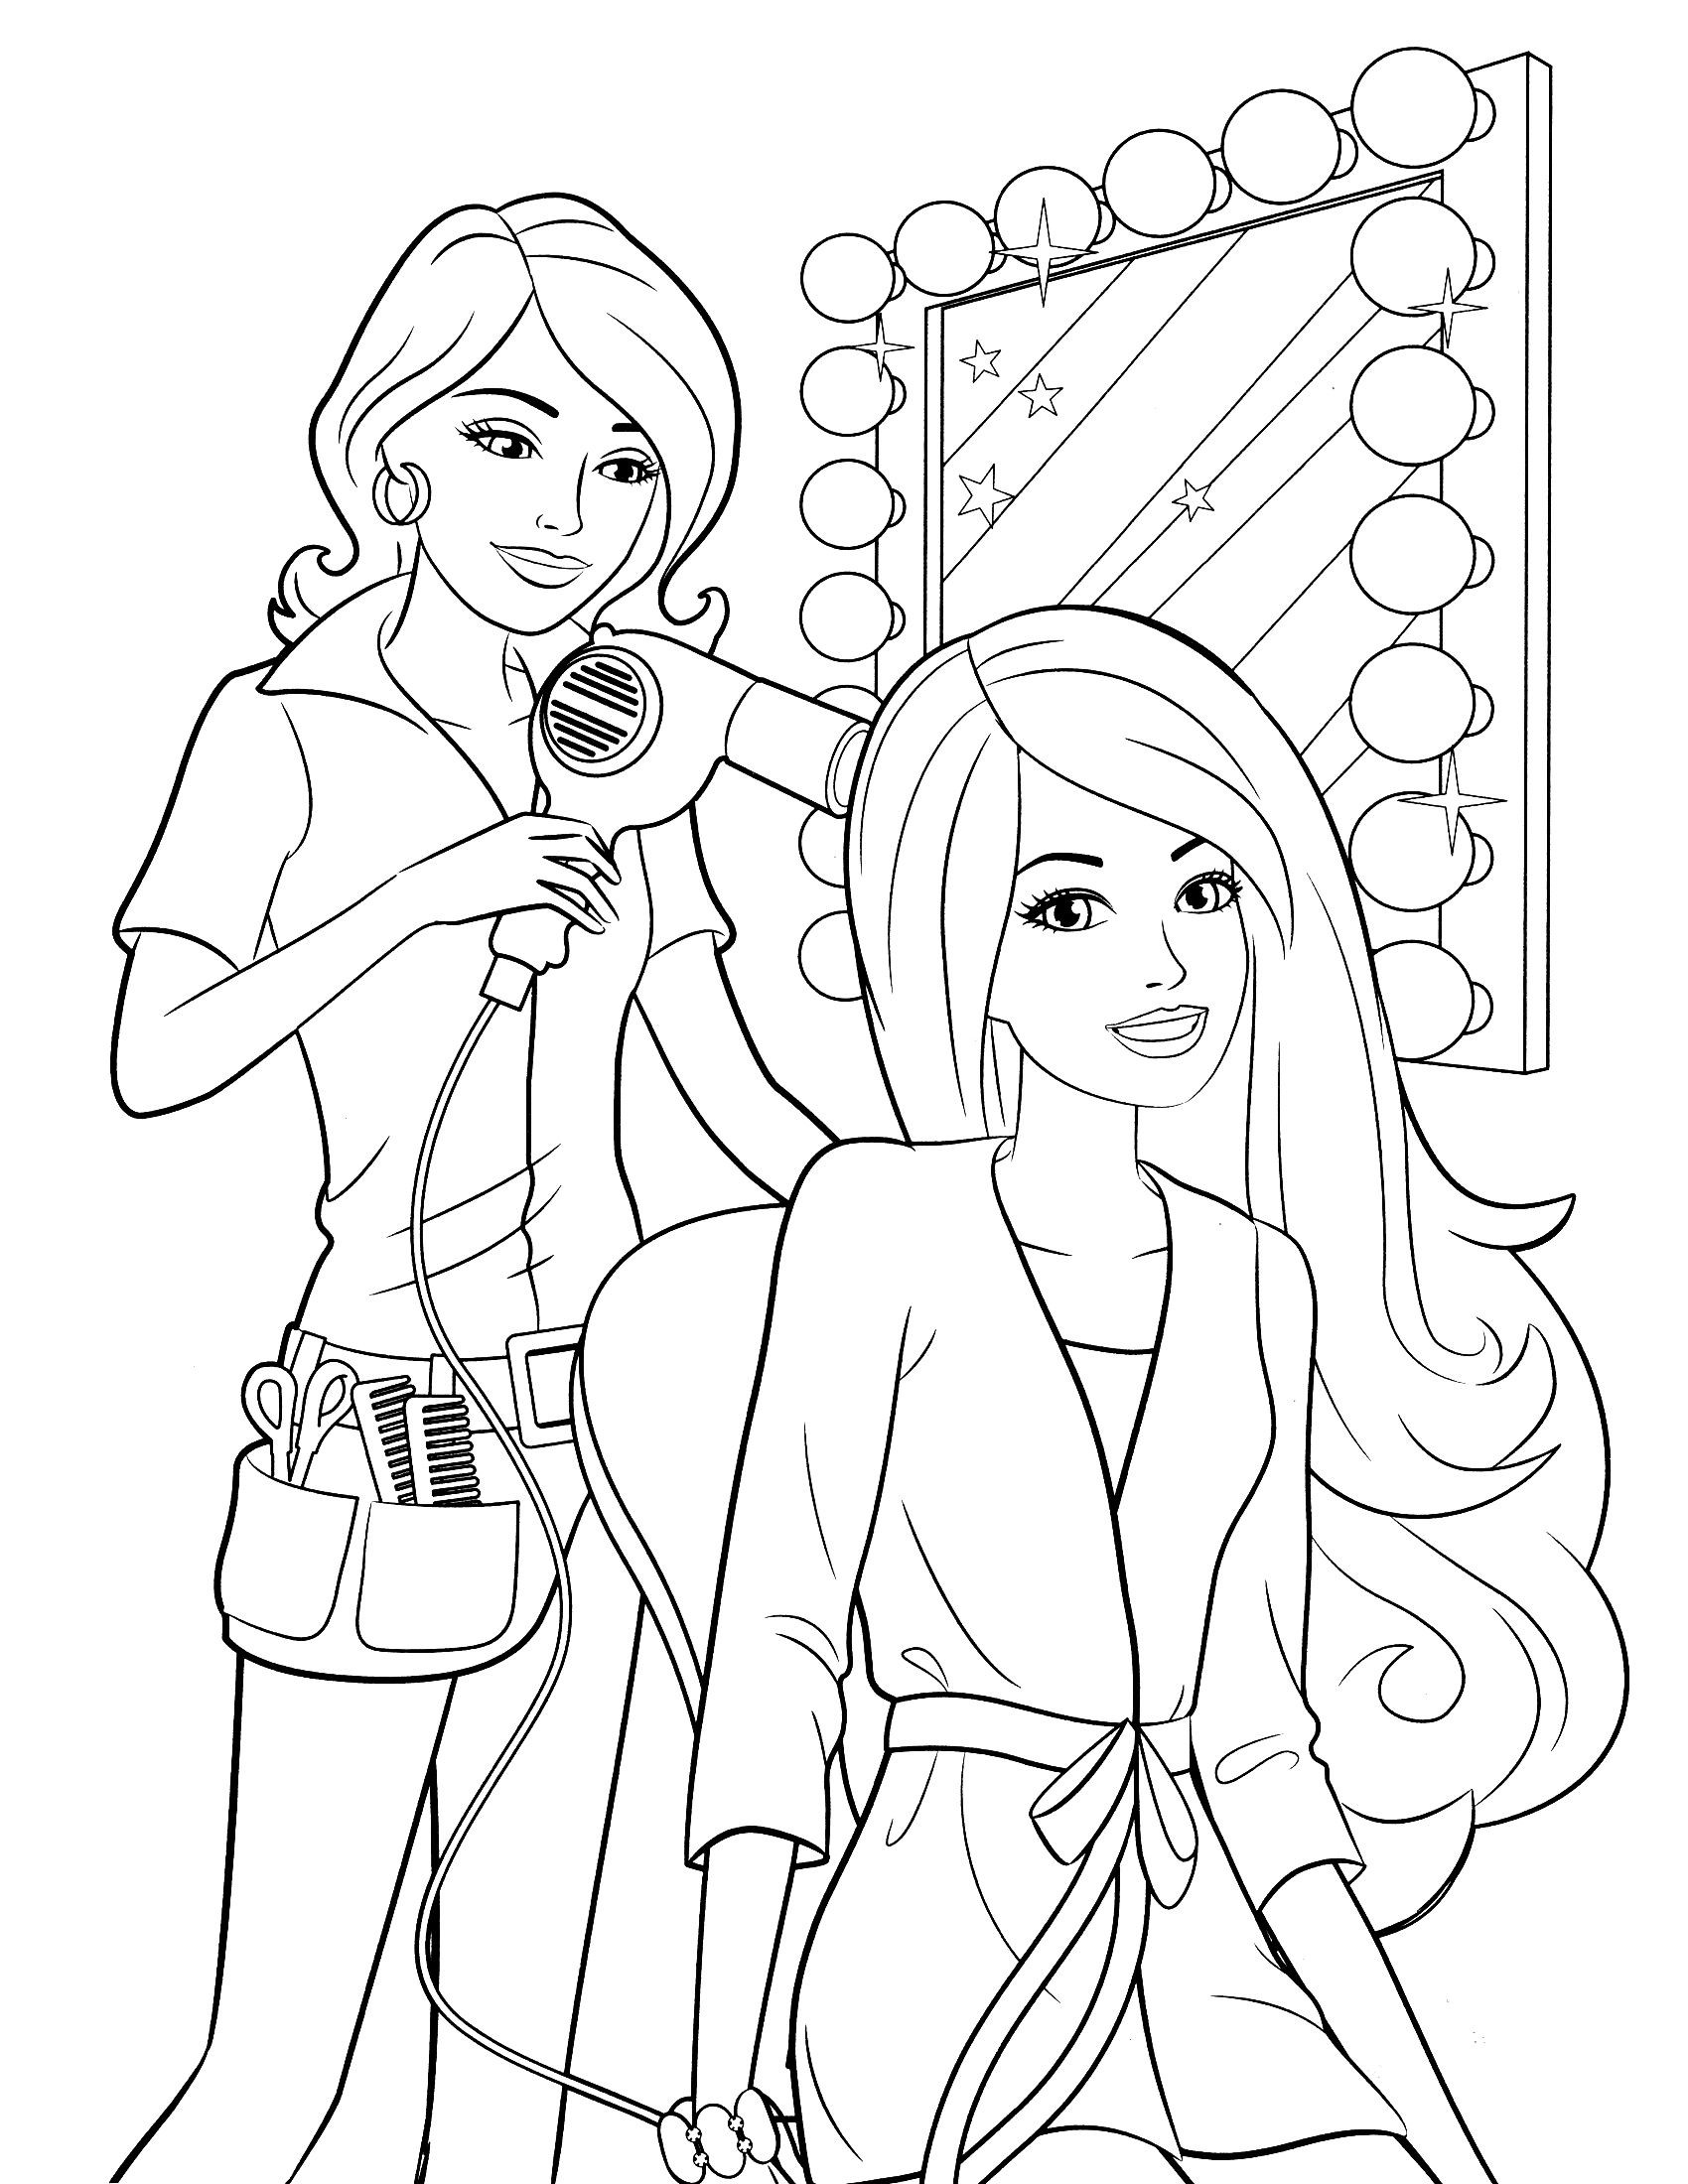 Download Top 25 Barbie Coloring Pages for Girls - Home, Family ...